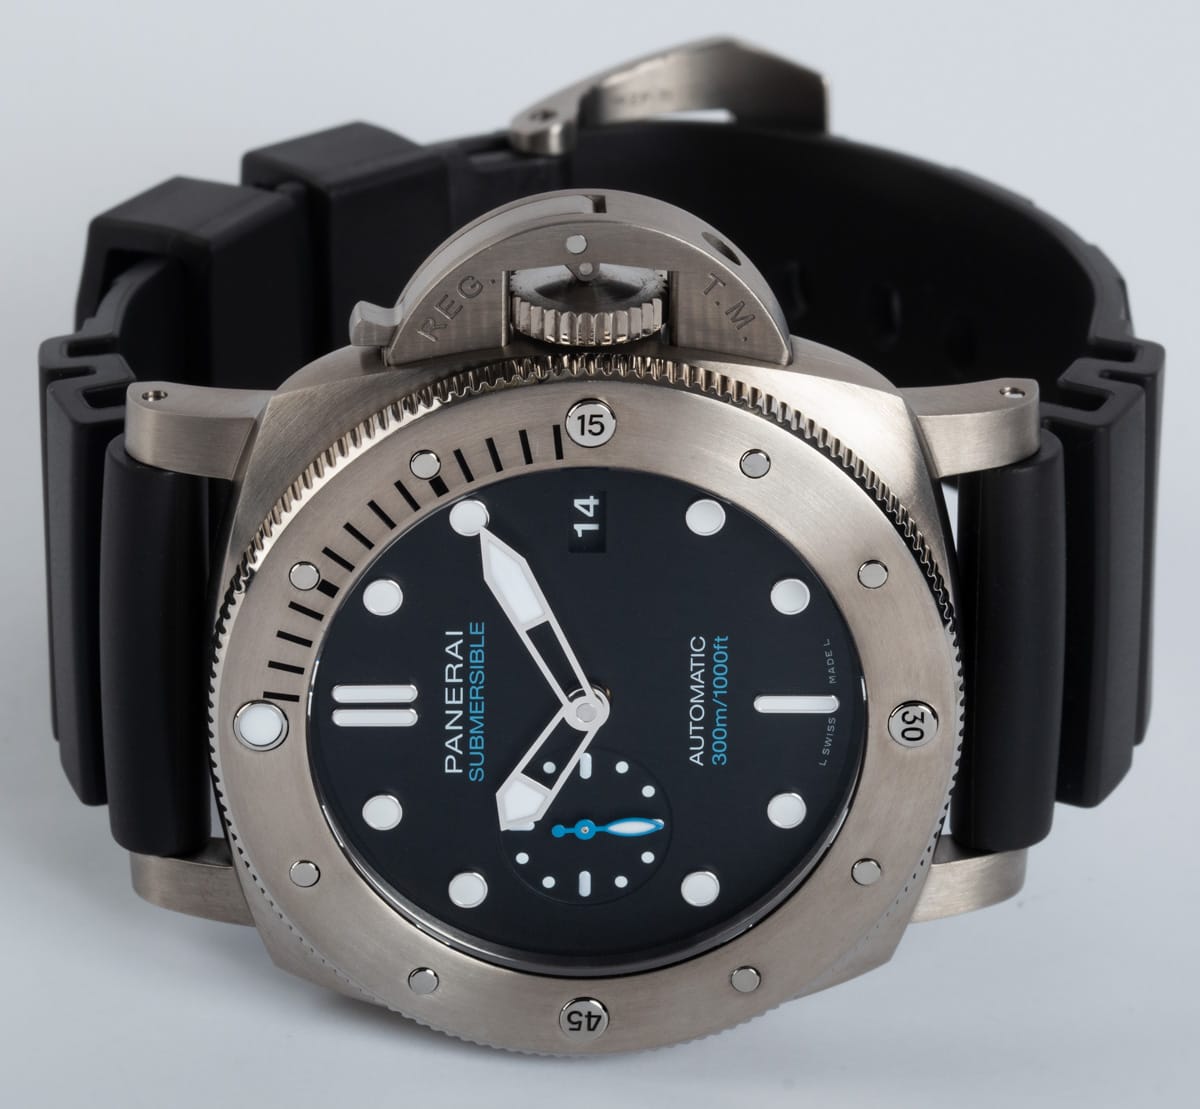 Front View of Luminor Submersible 47MM